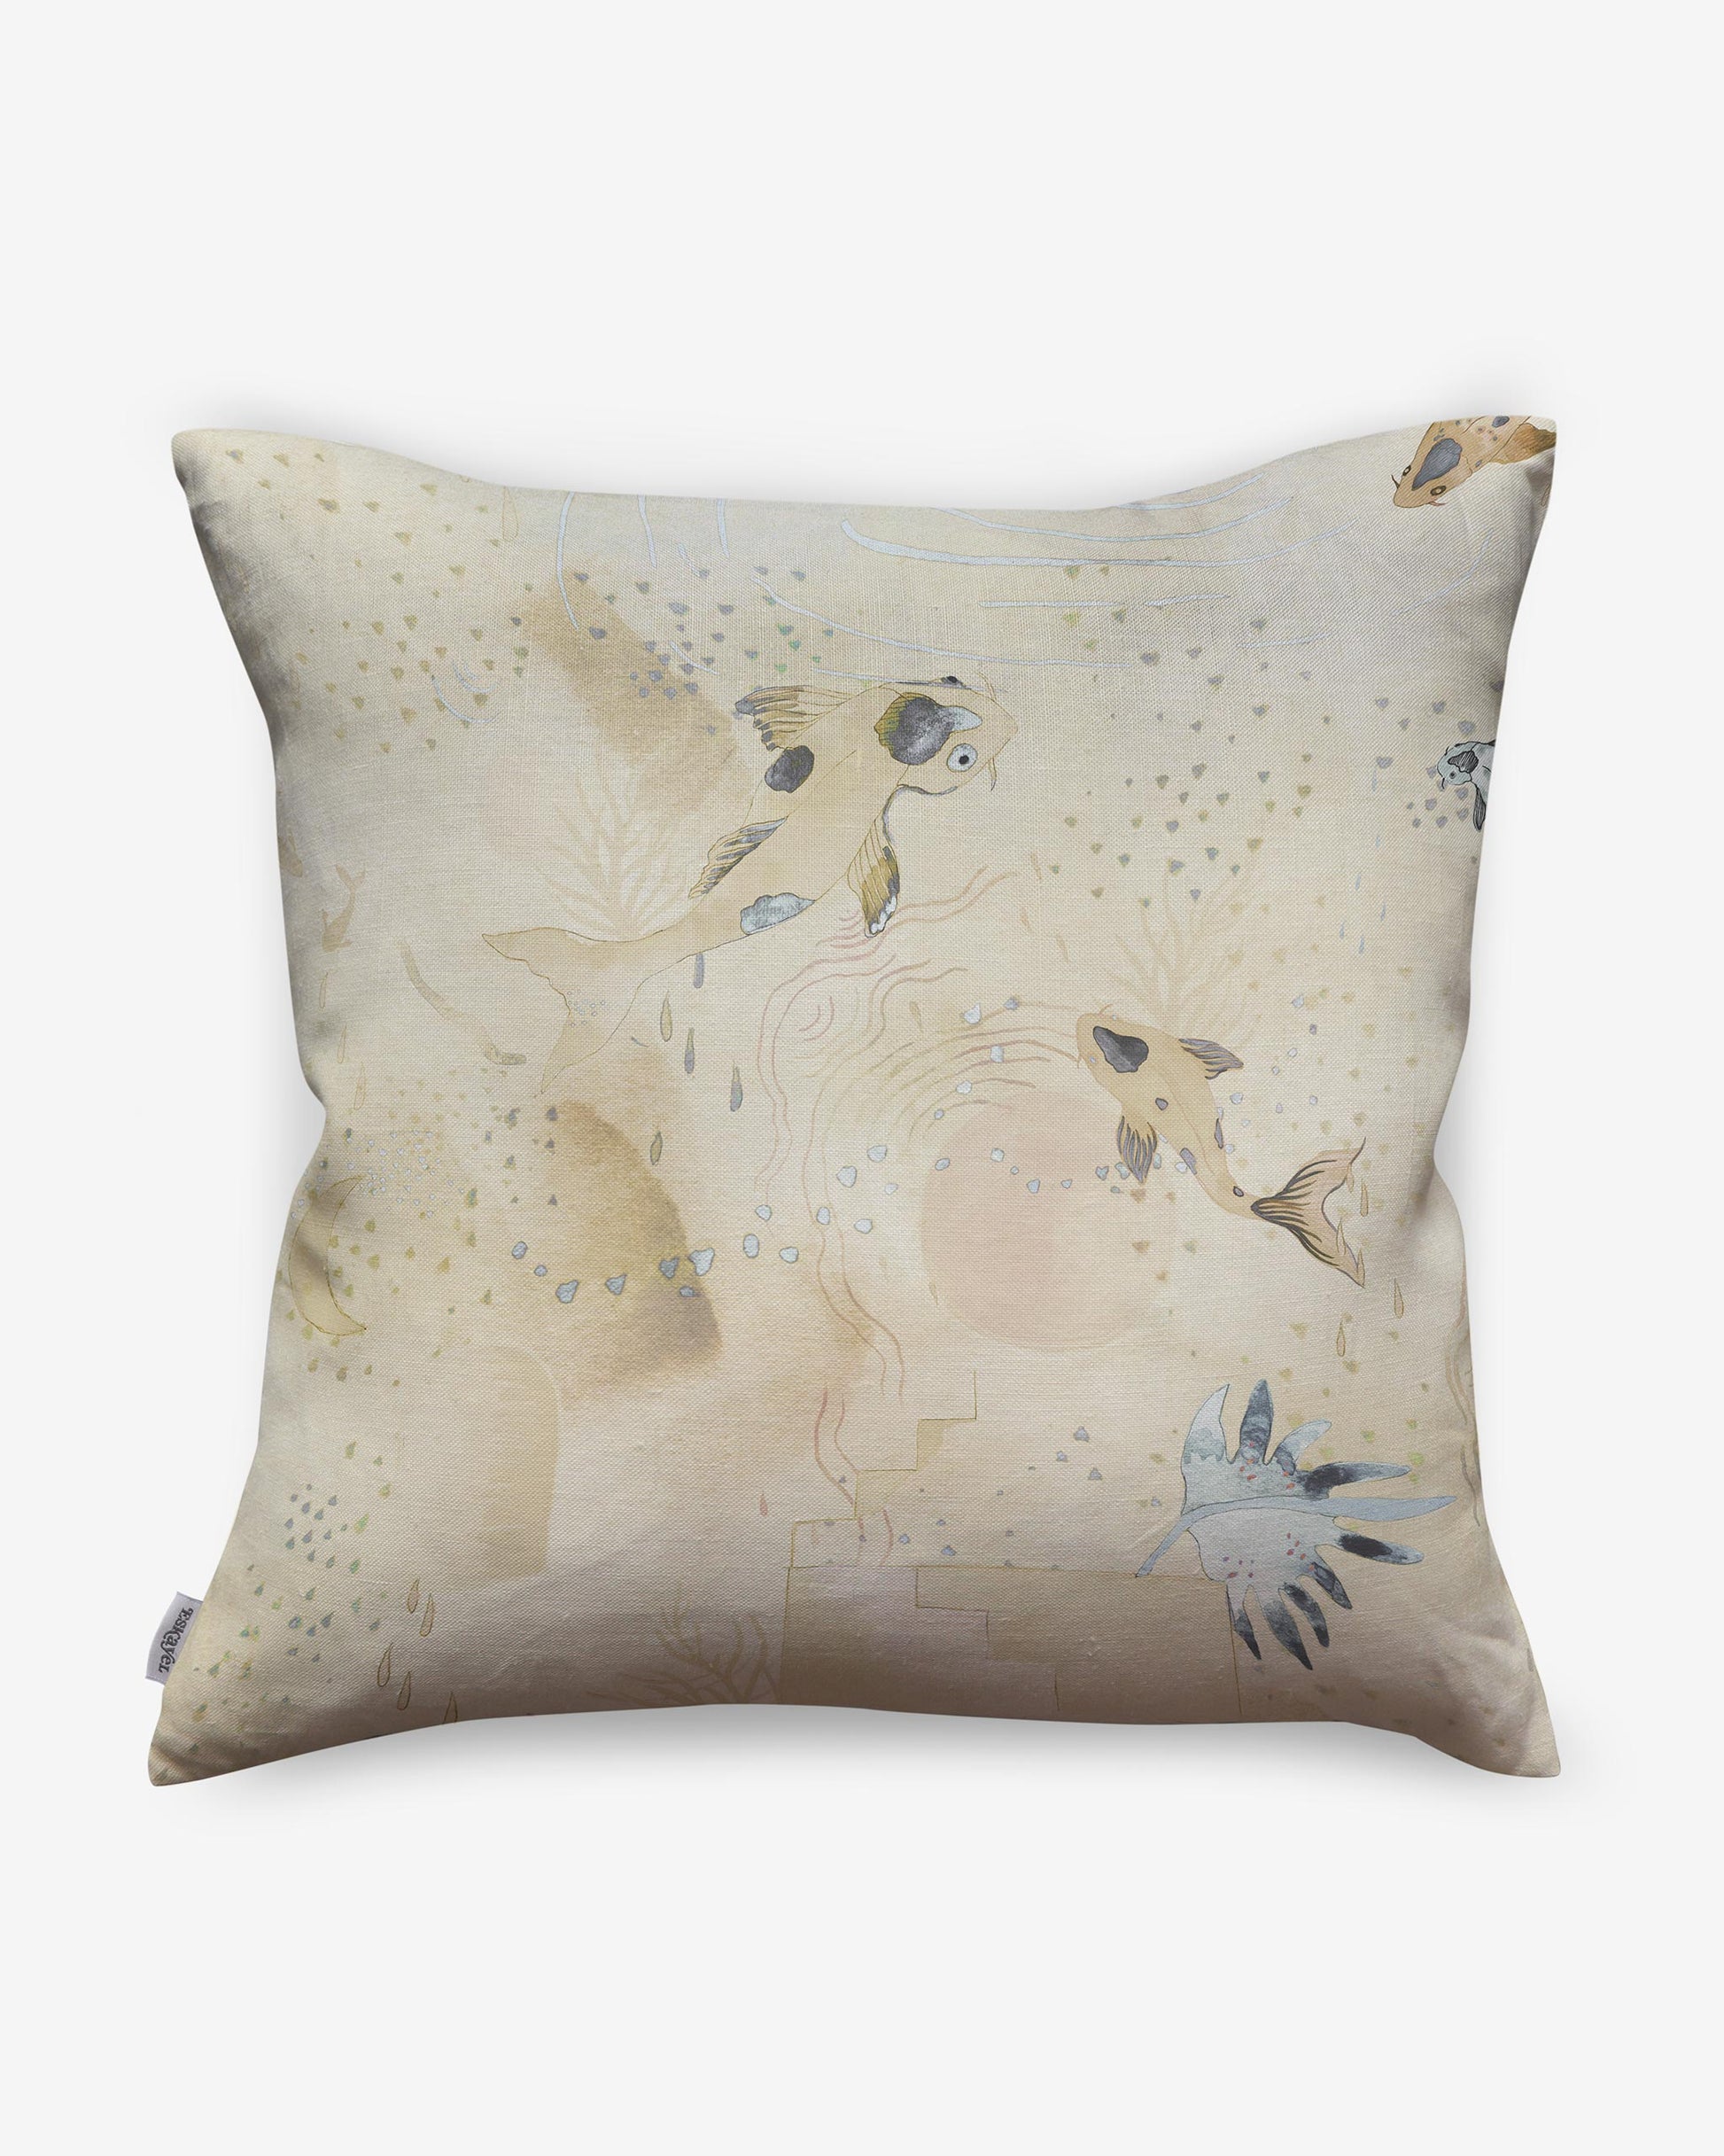 A beige Water Signs Pillow Sunshine, crafted from high-end fabric